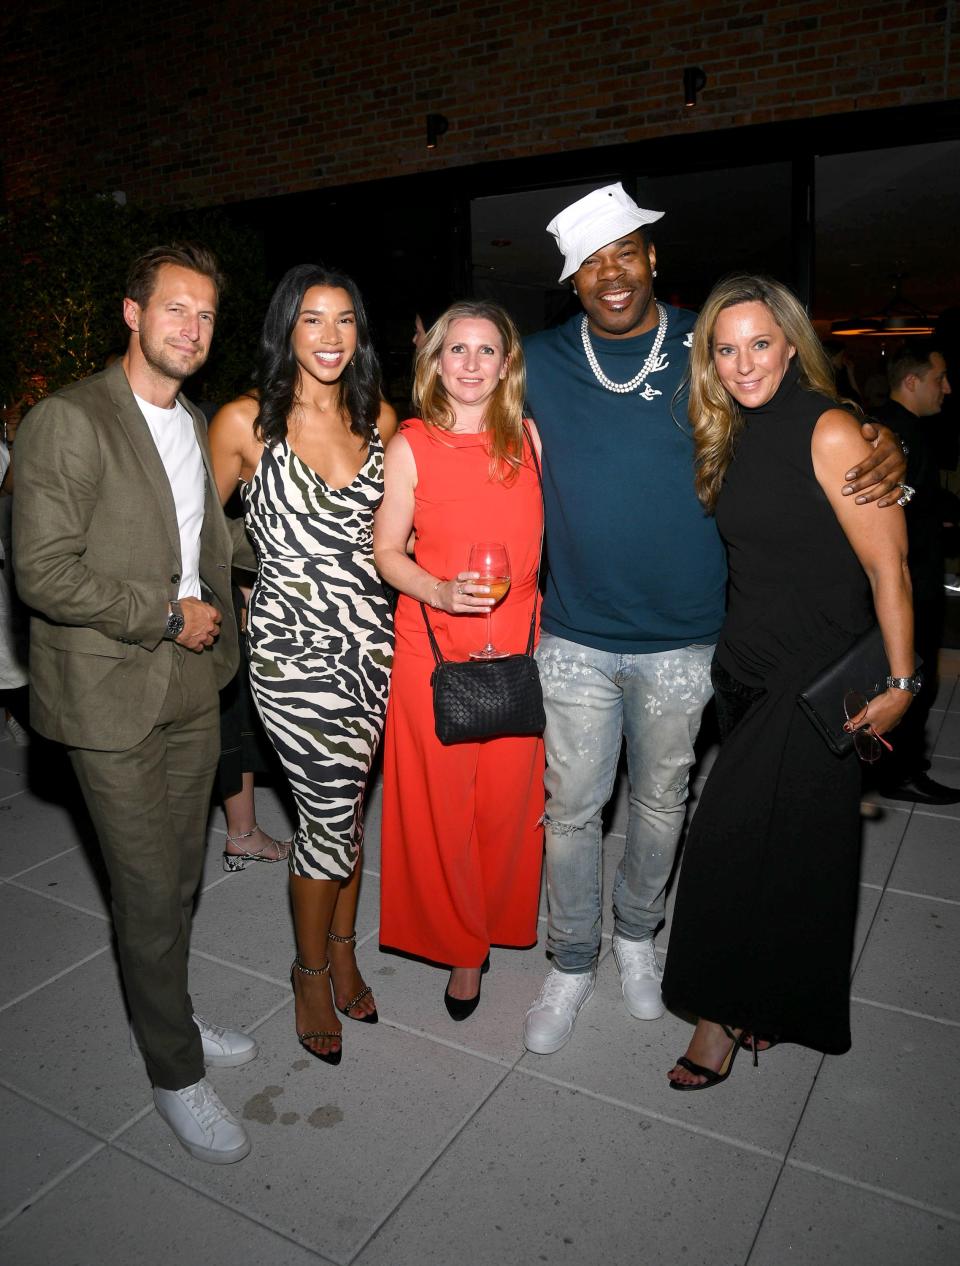 Brendan Fallis, Hannah Bronfman, Busta Rhymes and Ginny Wright at the 50th Anniversary of Royal Oak hosted by Audemars Piguet. - Credit: Getty Images for Audemars Piguet